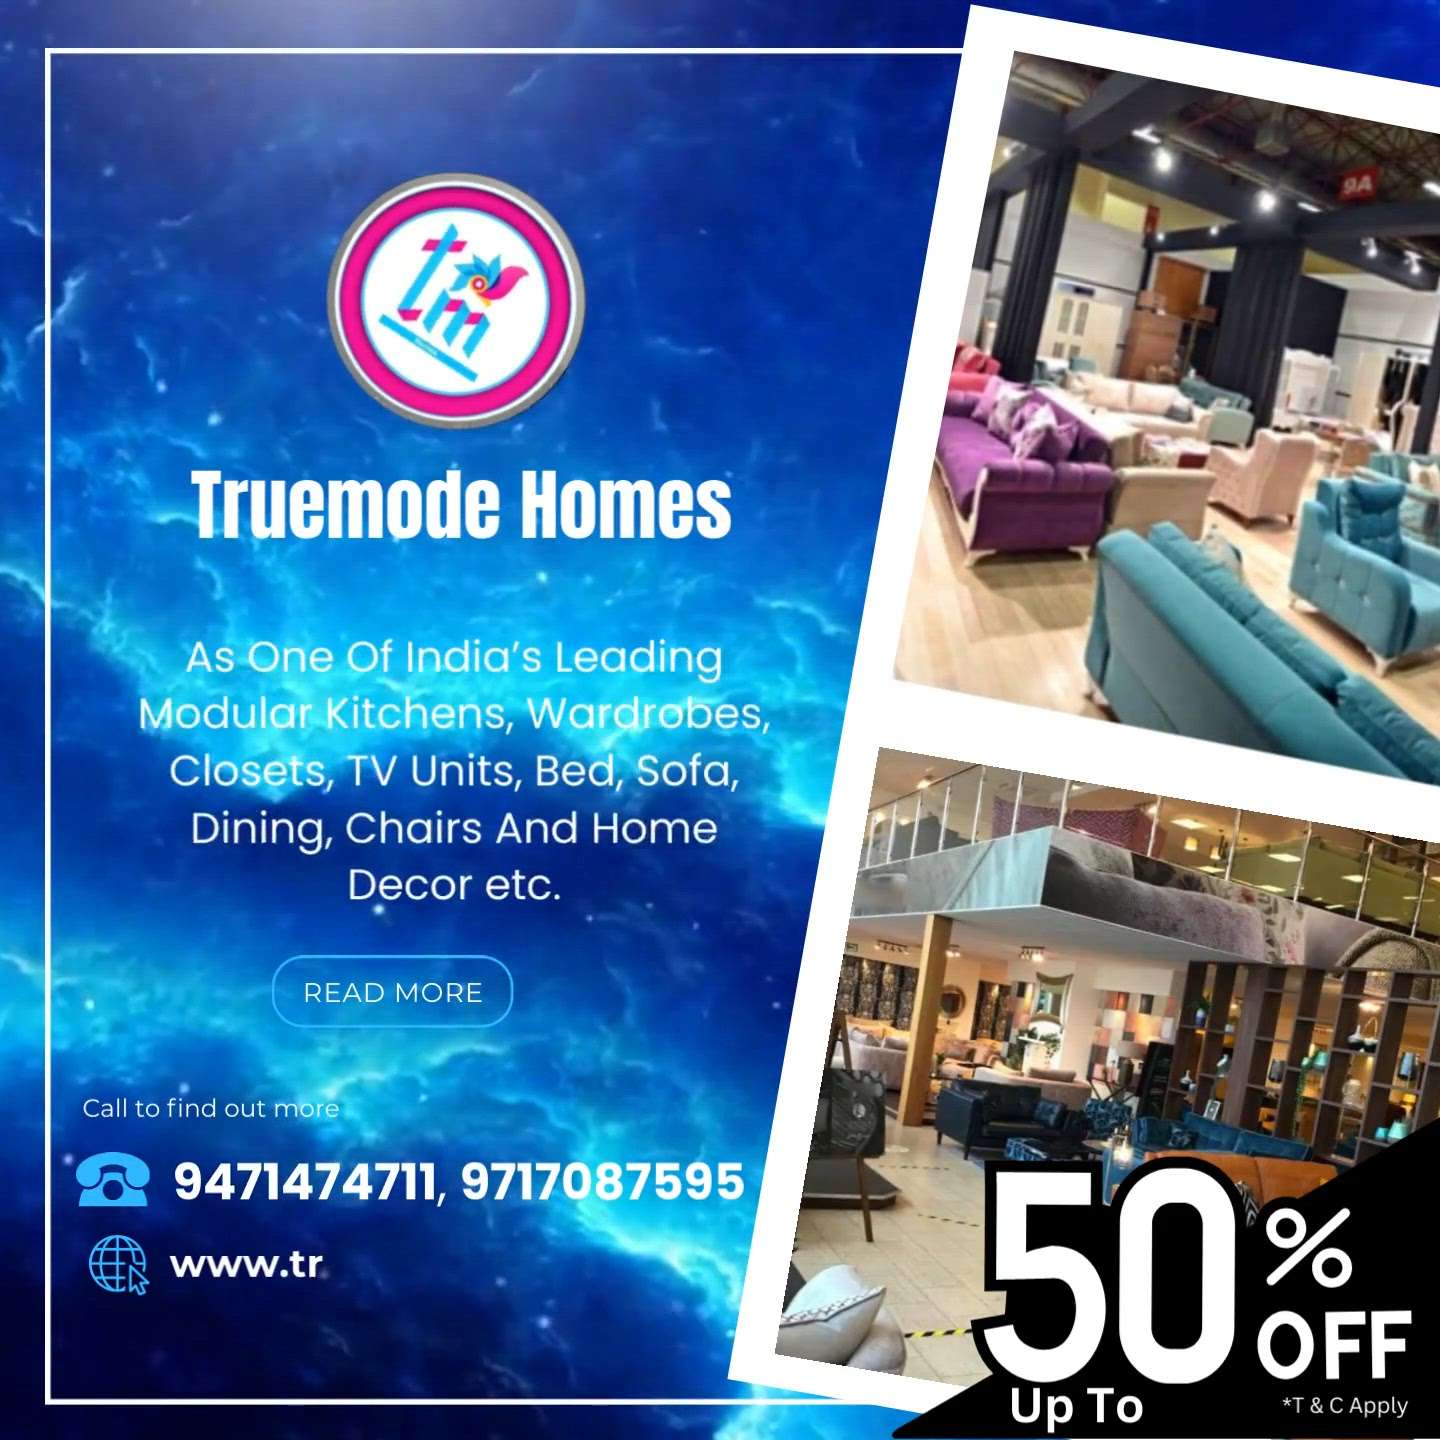 Dreams come true with Truemode Homes Luxury Furnitures Like- Bed, Sofa, Dinning table set, Centre table, coffee table and all Custom made Furniture on Lower price.

 #LUXURY_BED #ModernBedMaking  #LivingRoomSofa  #LUXURY_SOFA  #dinning_set  #dinningchair  #dinningstyle  #centertablesdesign  #centertable  #CoffeeTable  #coffetable  #console  #puffychair  #HomeDecor  #customized_mirror  #GlassMirror  #mirrors  #LED_Sensor_Mirror  #LED_Mirror